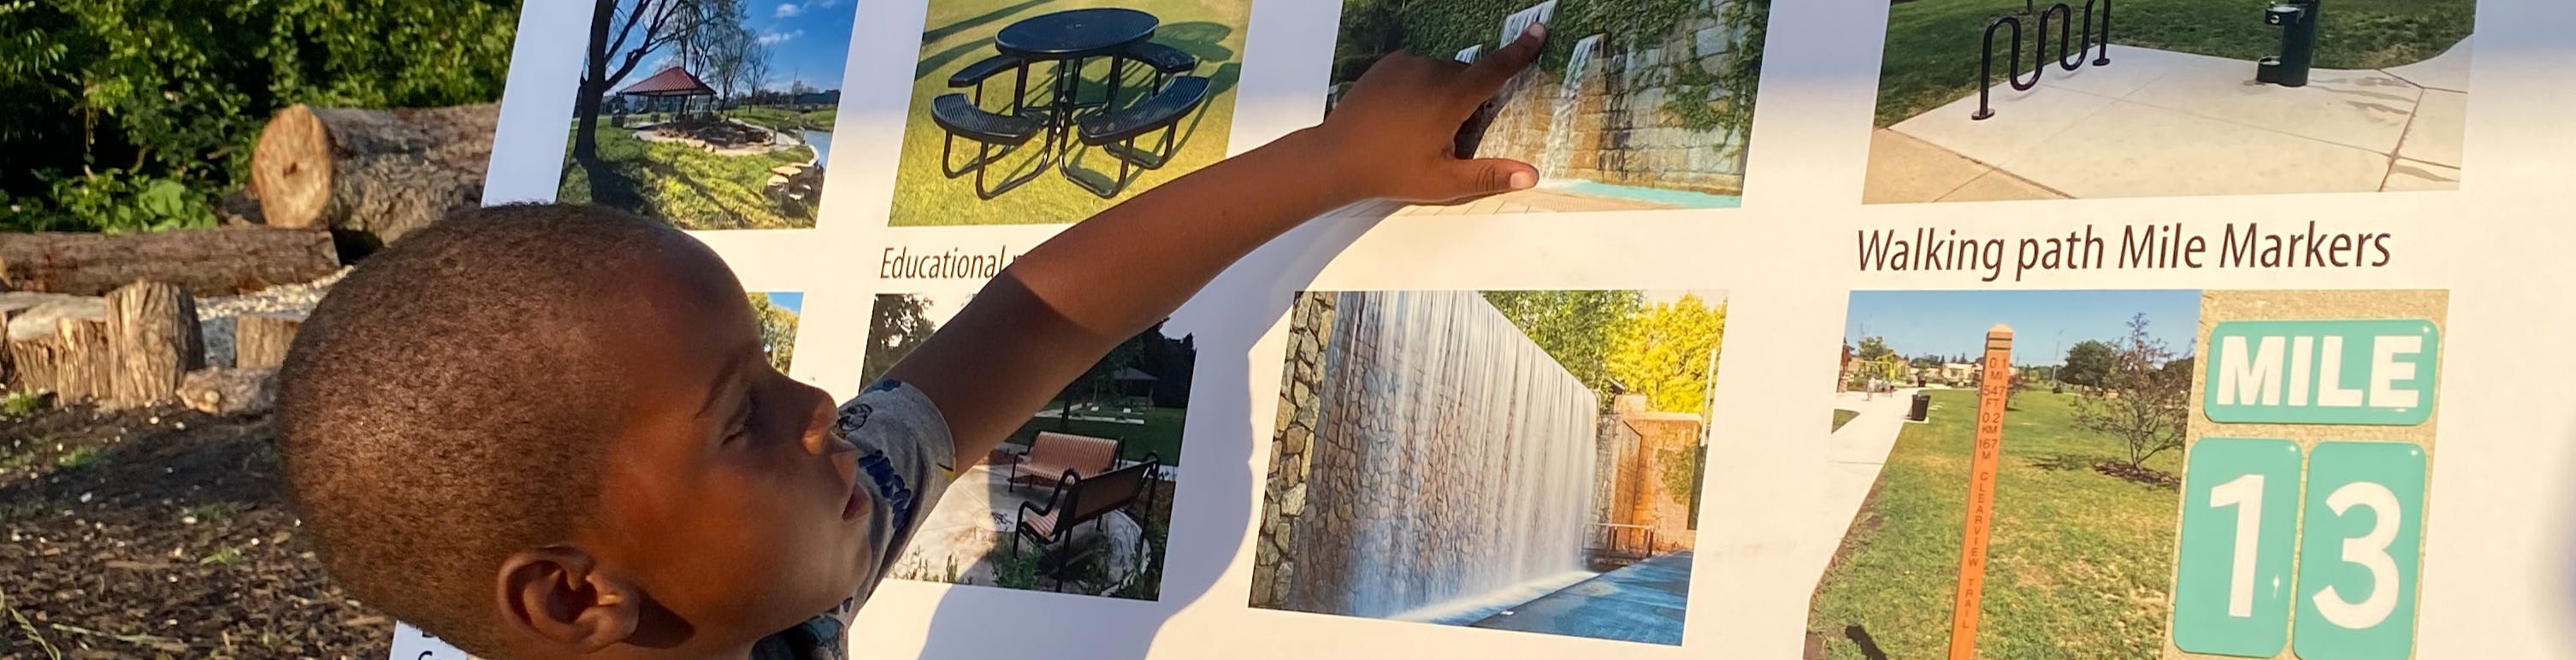 Child pointing to an idea board with photos of possible park amenities